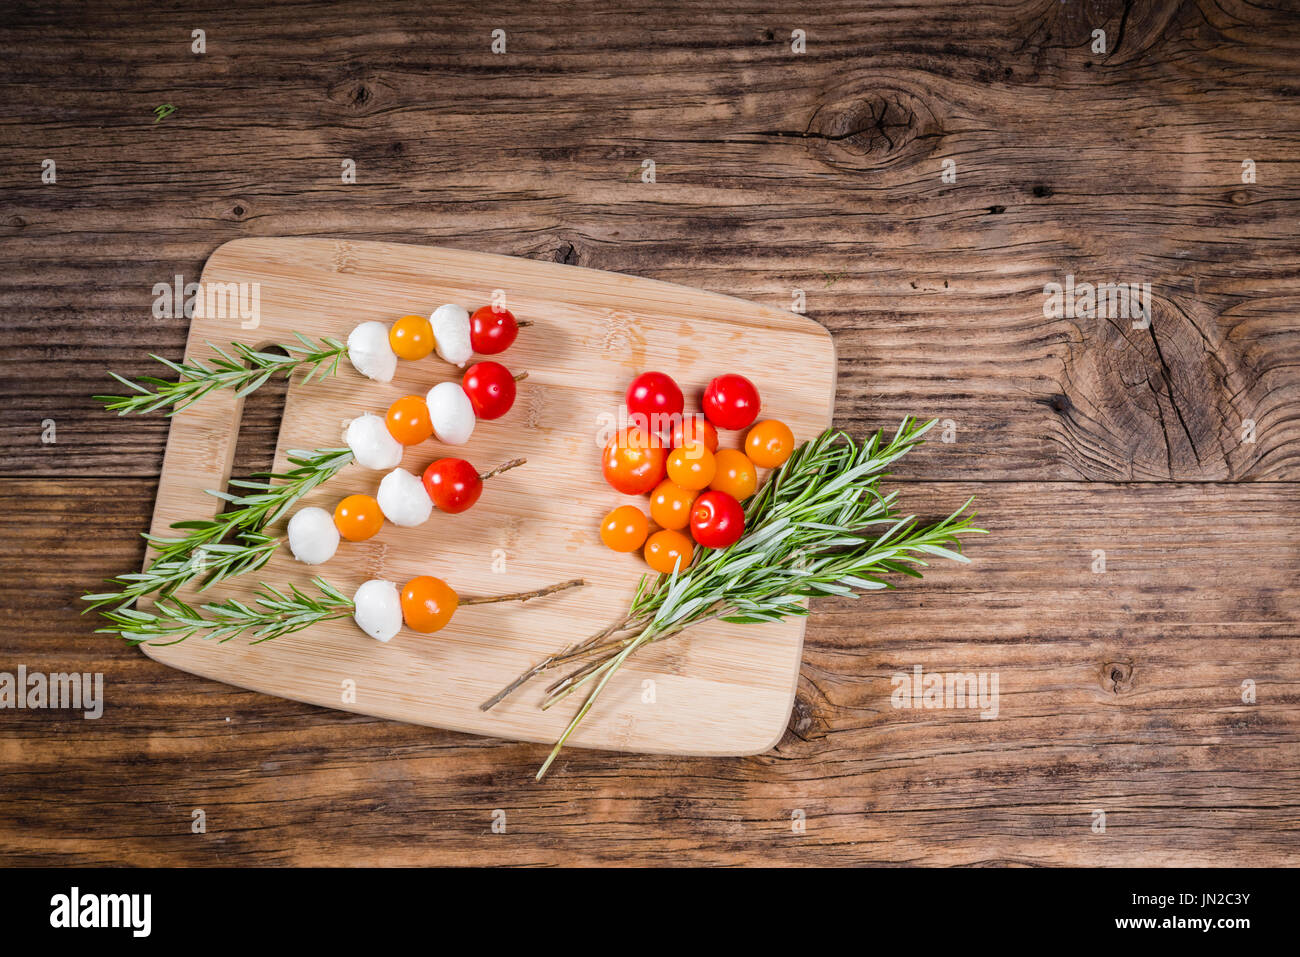 Tomatoes and cheese balls on rosemary skewers Stock Photo